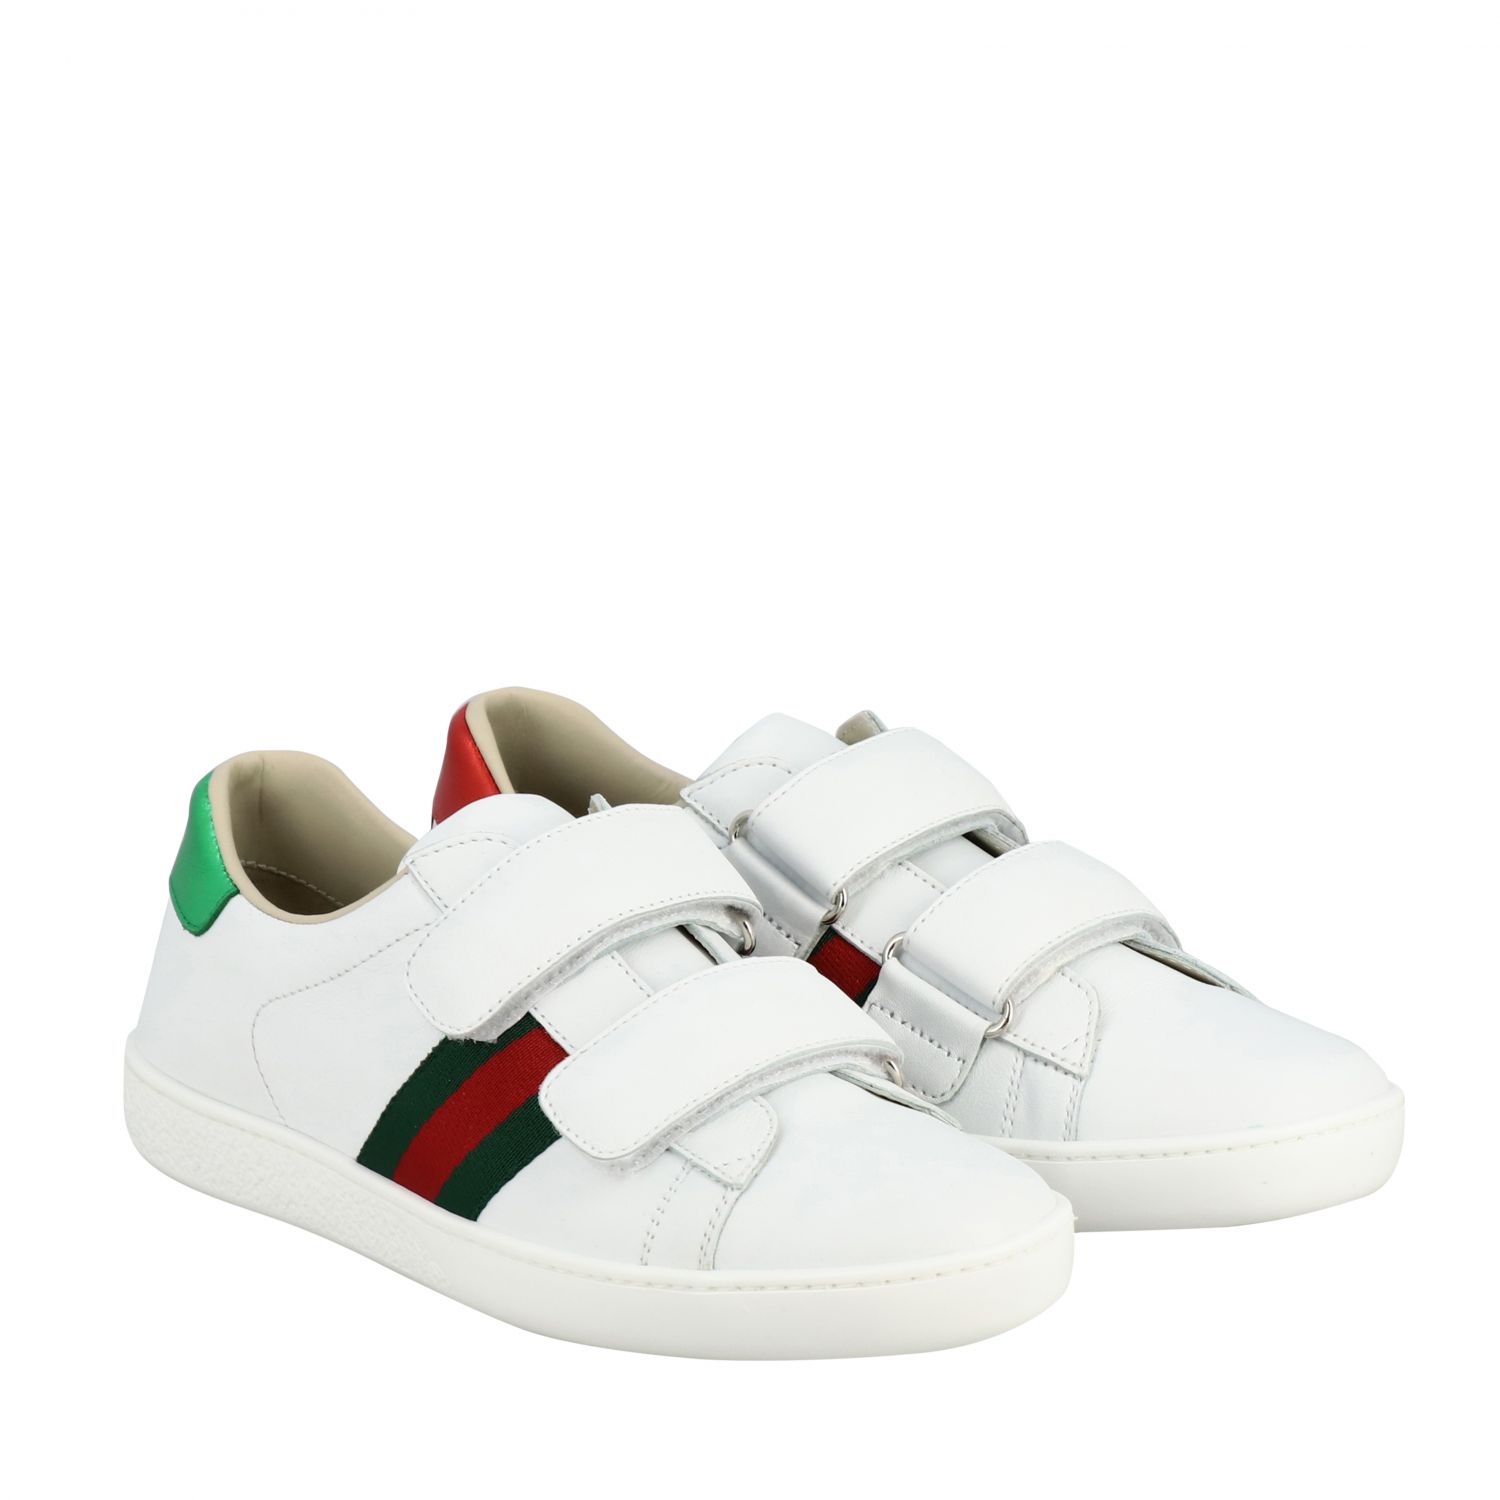 Gucci New Ace sneakers in leather with Web bands | Shoes Gucci Kids ...